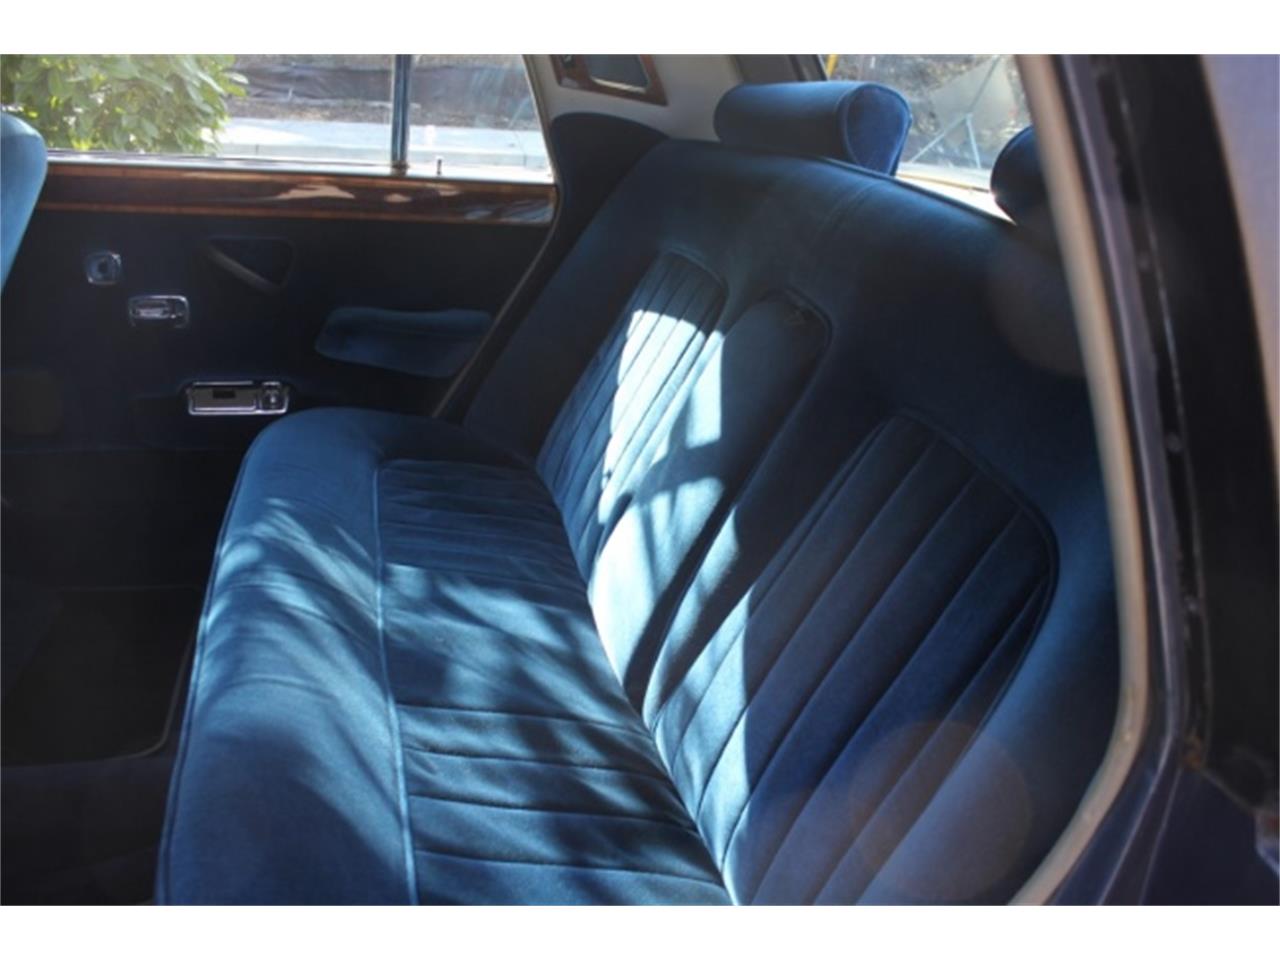 1975 Rolls-Royce Silver Shadow for sale in Tacoma, WA – photo 37